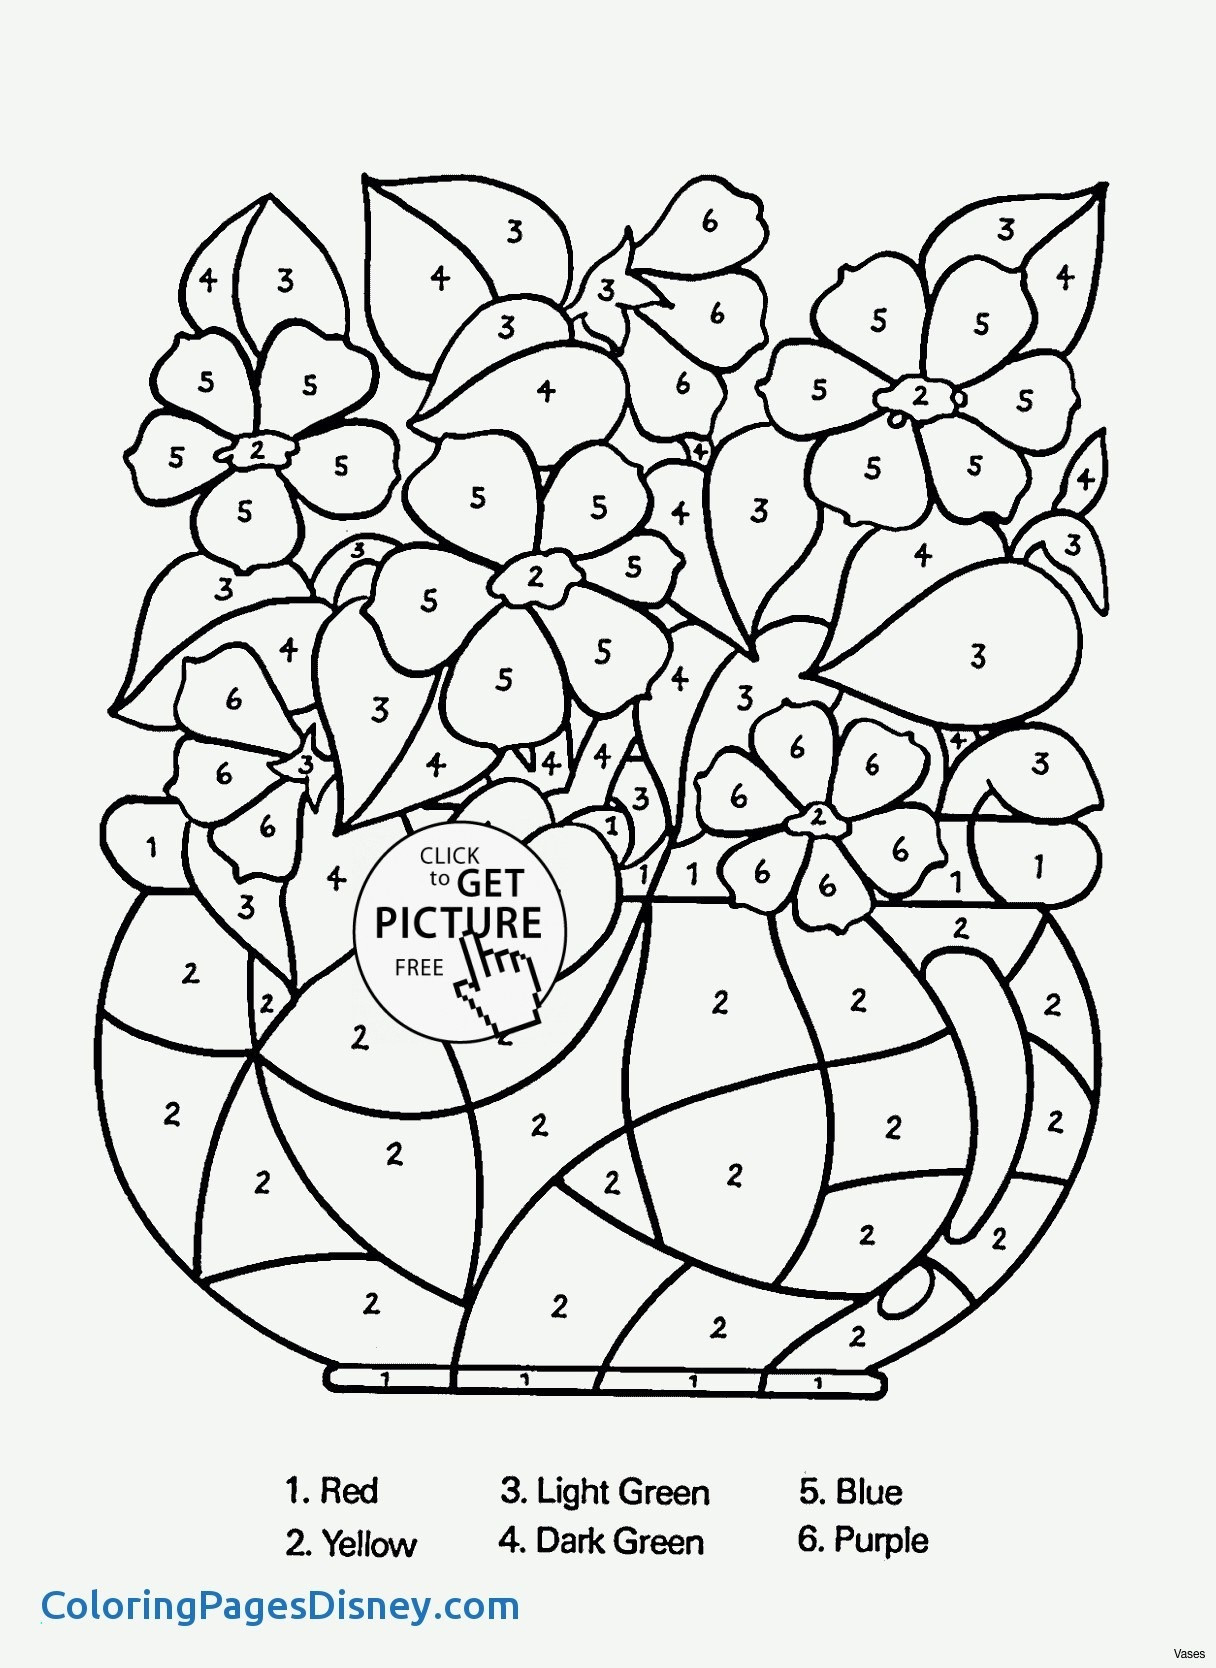 17 Fashionable Purple Artificial Flowers In Vase 2024 free download purple artificial flowers in vase of best images purple flowers natural zoom in coloring sheet flowers coloring sheets lovely cool vases flower vase coloring page pages flowers in a